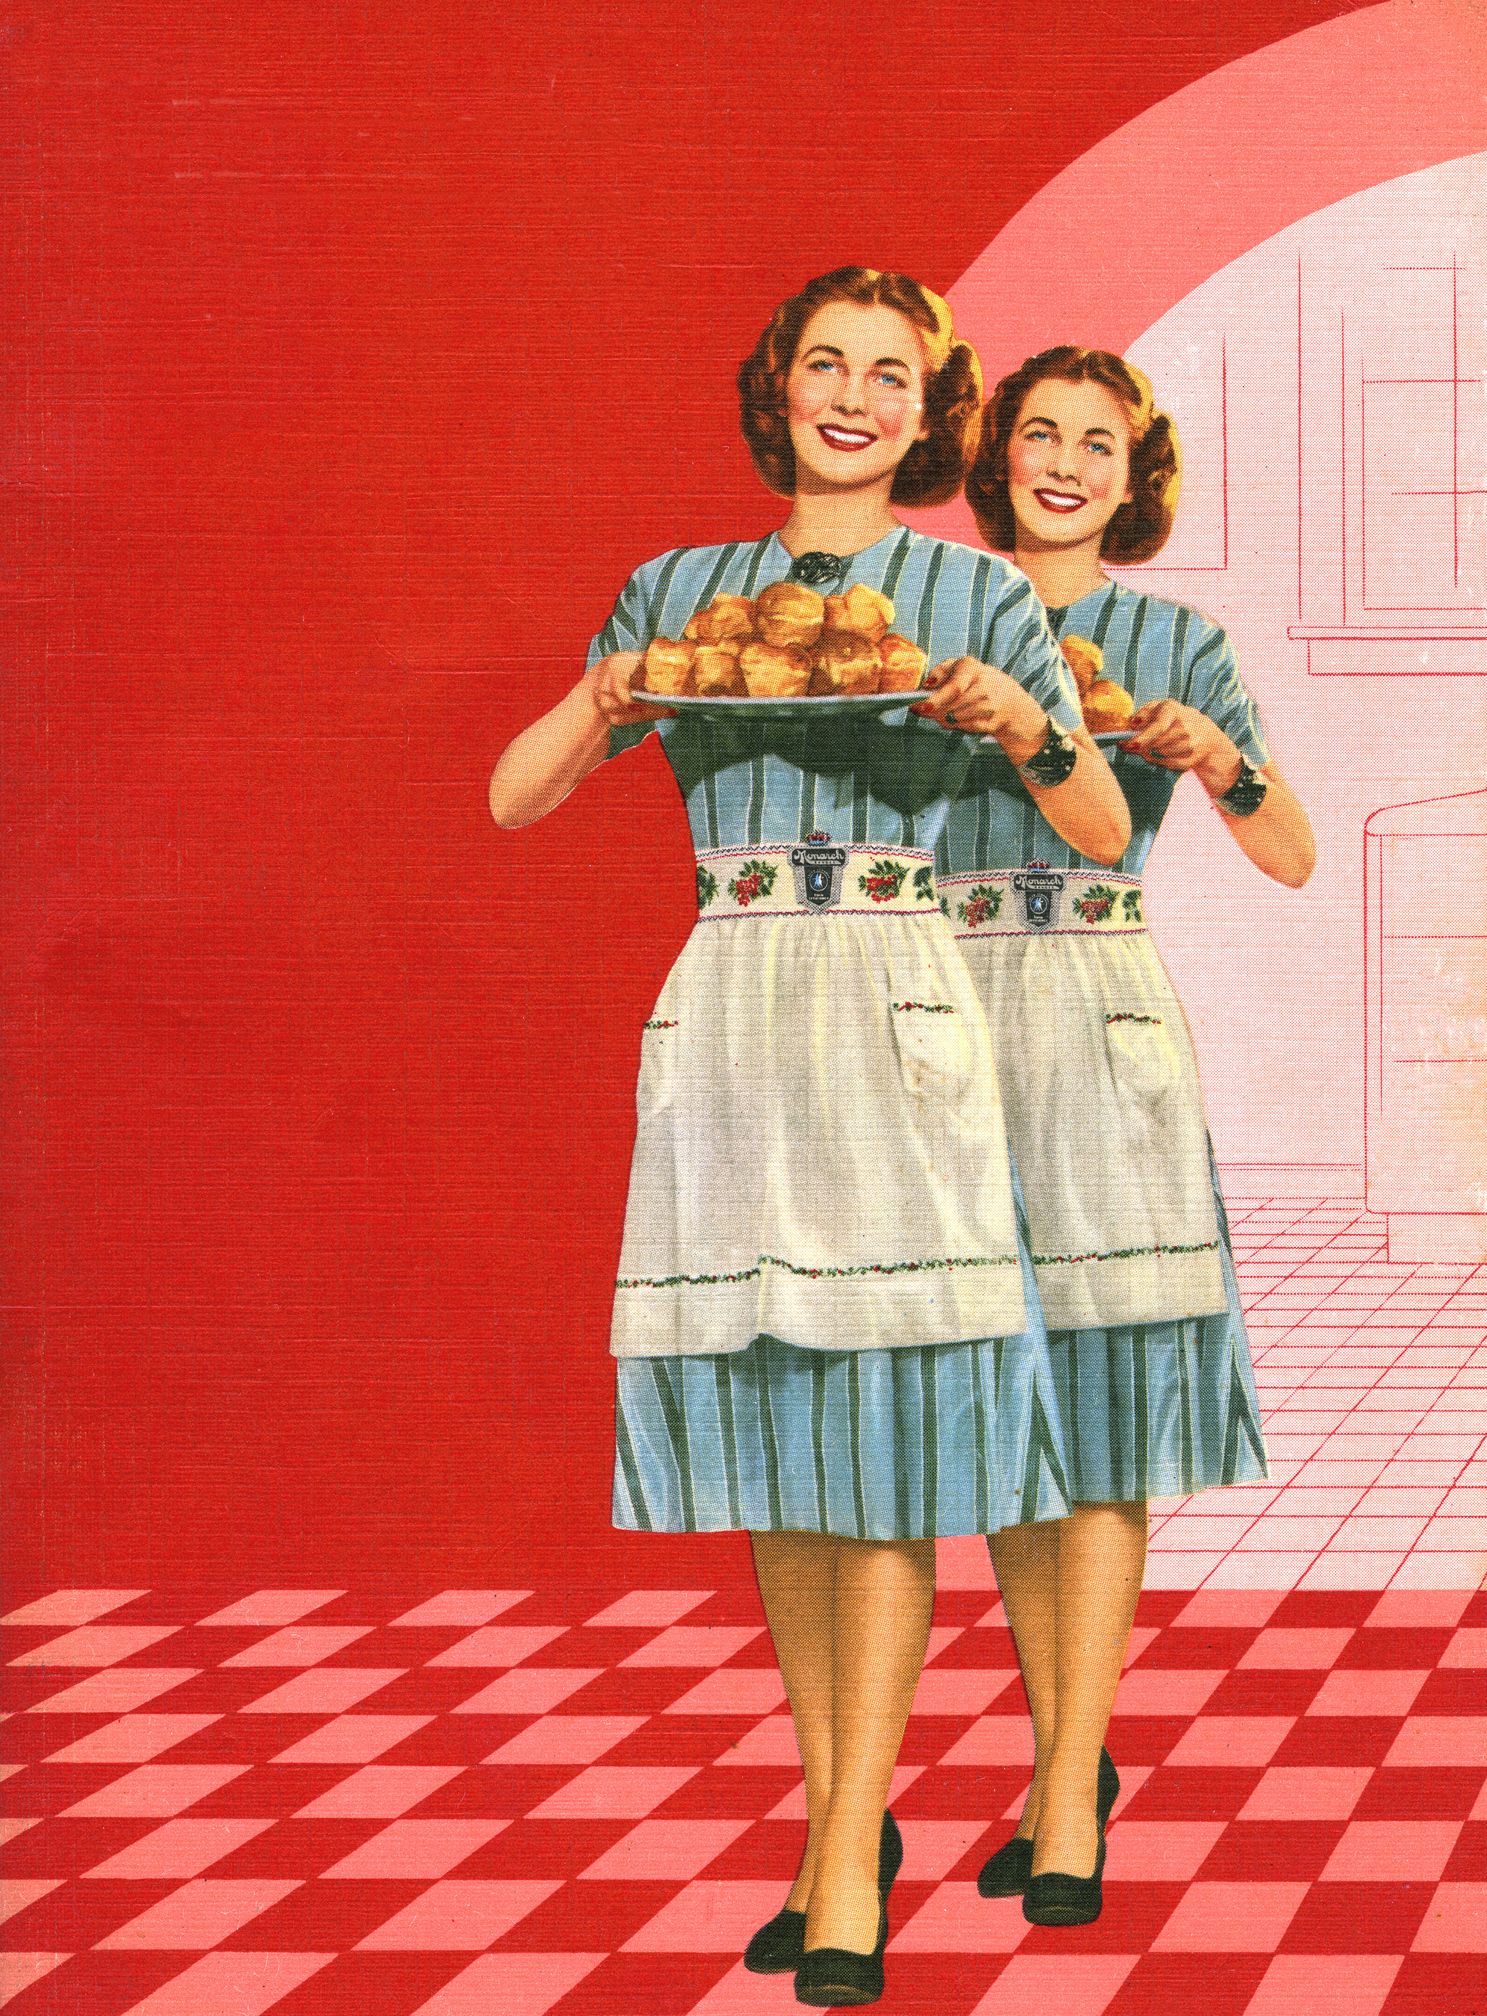 <p>The TV mothers of the 1950s always seemed so relaxed and content—Donna Reed and June Cleaver vacuumed in heels and wore pearls while rotating the roast, after all. But in real life, most American women were far too busy for perfection. </p><p>Housekeeping was physically demanding work and managing the family budget was often a challenge (heck, it still is!). Food prices had skyrocketed and households <a href="https://www.bls.gov/opub/uscs/1950.pdf">spent 30 percent of their budget</a> on food. The price of butter, for example, had doubled since the previous decade. And without credit cards to bridge a monthly shortfall, women were tasked with making paychecks stretch.</p><p>For many women, working outside the home was a necessity, and about 30 percent of women in the 1950s did so. While "hacks" may seem like an <a href="https://www.pinterest.com/search/pins/?q=hacks&rs=typed&term_meta%5B%5D=hacks%7Ctyped">invention of the Pinterest era</a>, mid-century women had their own life hacks to save money and time. Magazines and books supplied them with ideas on how they could make life a little bit easier, with so much on their plates. Of course, many of these hacks are no longer advisable (particularly a suggestion to block a fireplace with a piece of asbestos board!) but some are still relevant to the modern woman:</p>